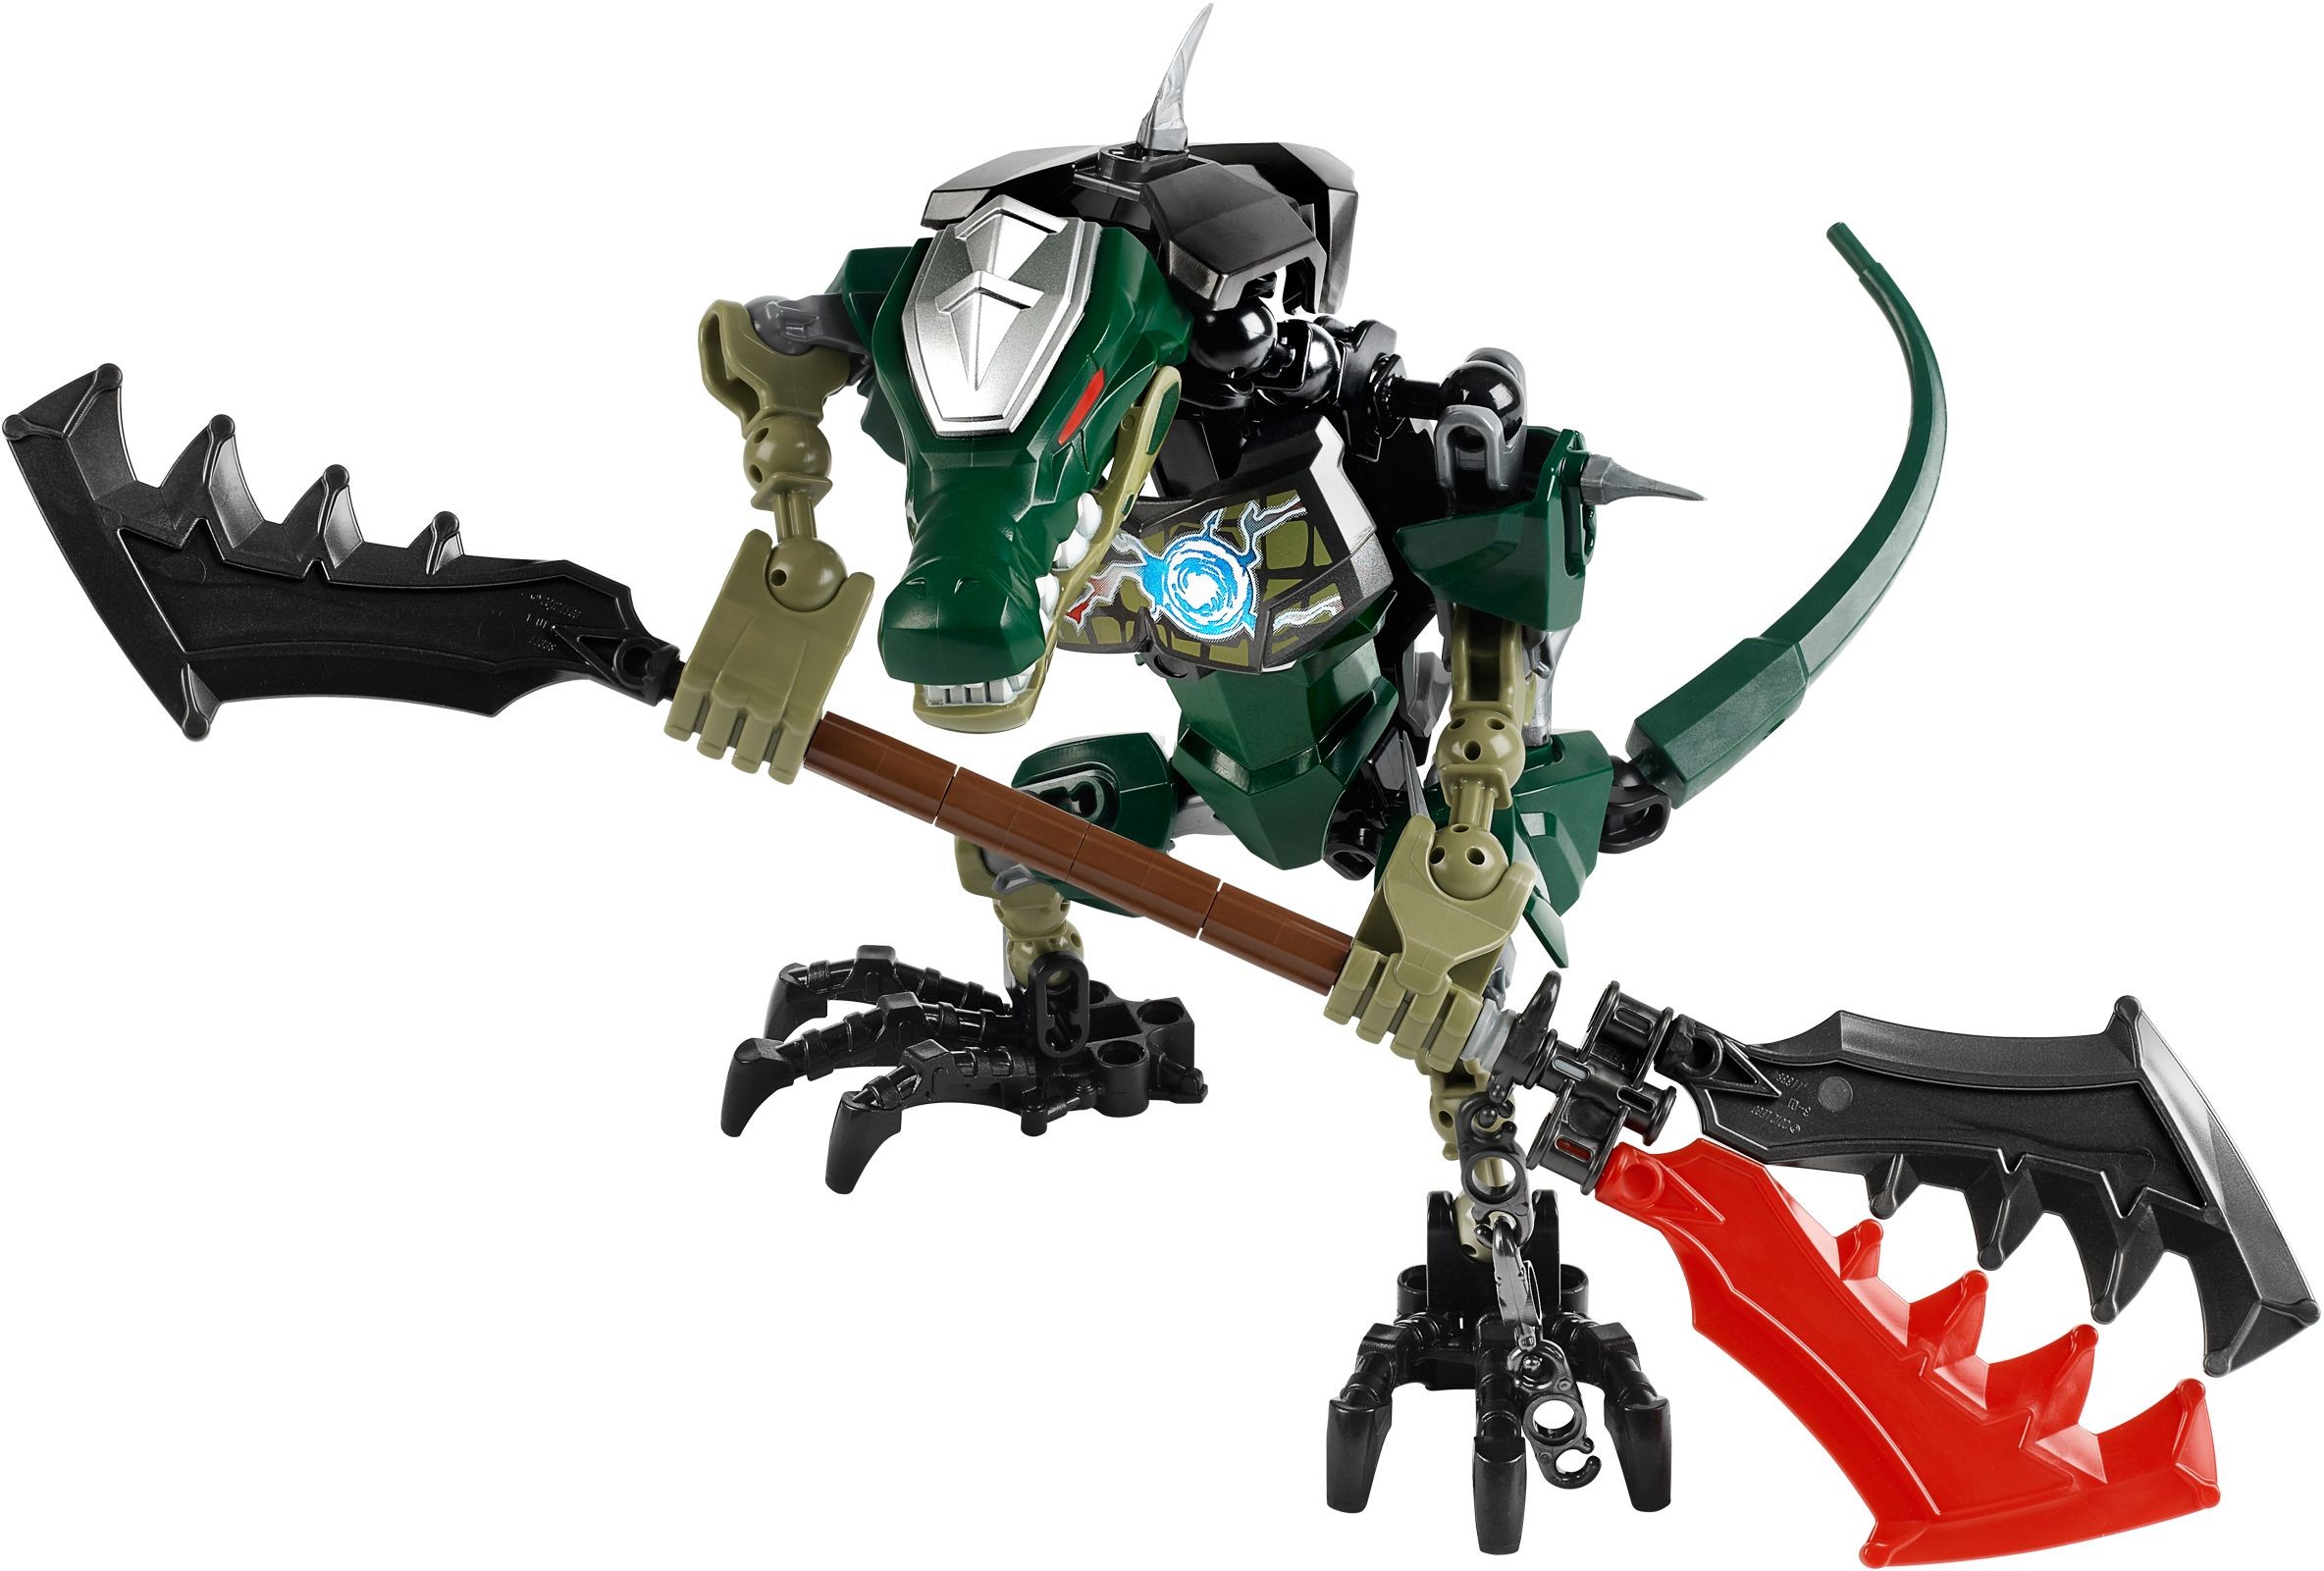 Incite Excrement cough Legends of Chima | Constraction | Brickset: LEGO set guide and database